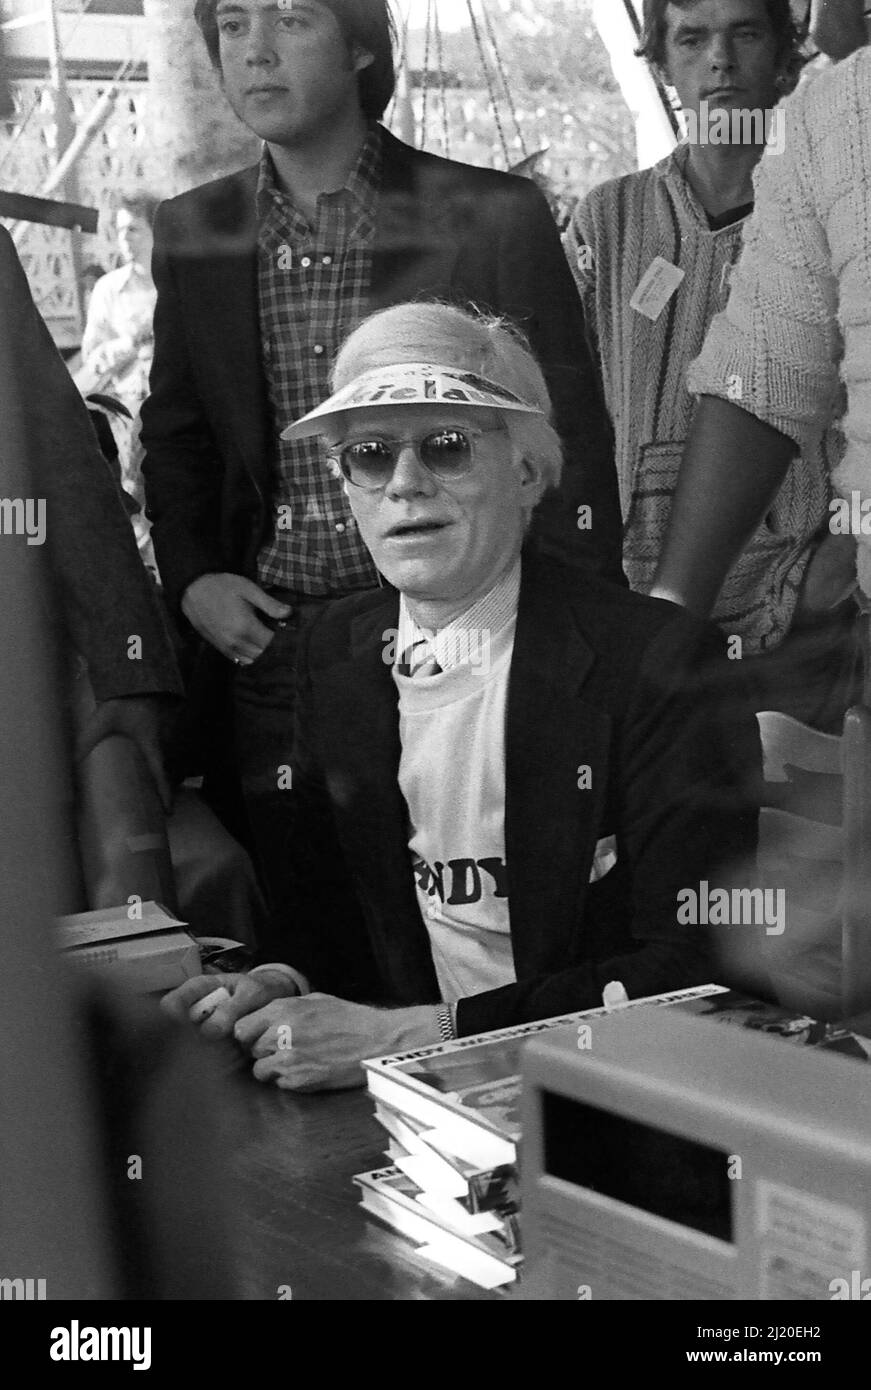 Andy Warhol appearing at an event billed as 'Amos and Andy' in the Hollywood outlet for Famous Amos Cookies. Los Angeles, CA.,1979. Stock Photo